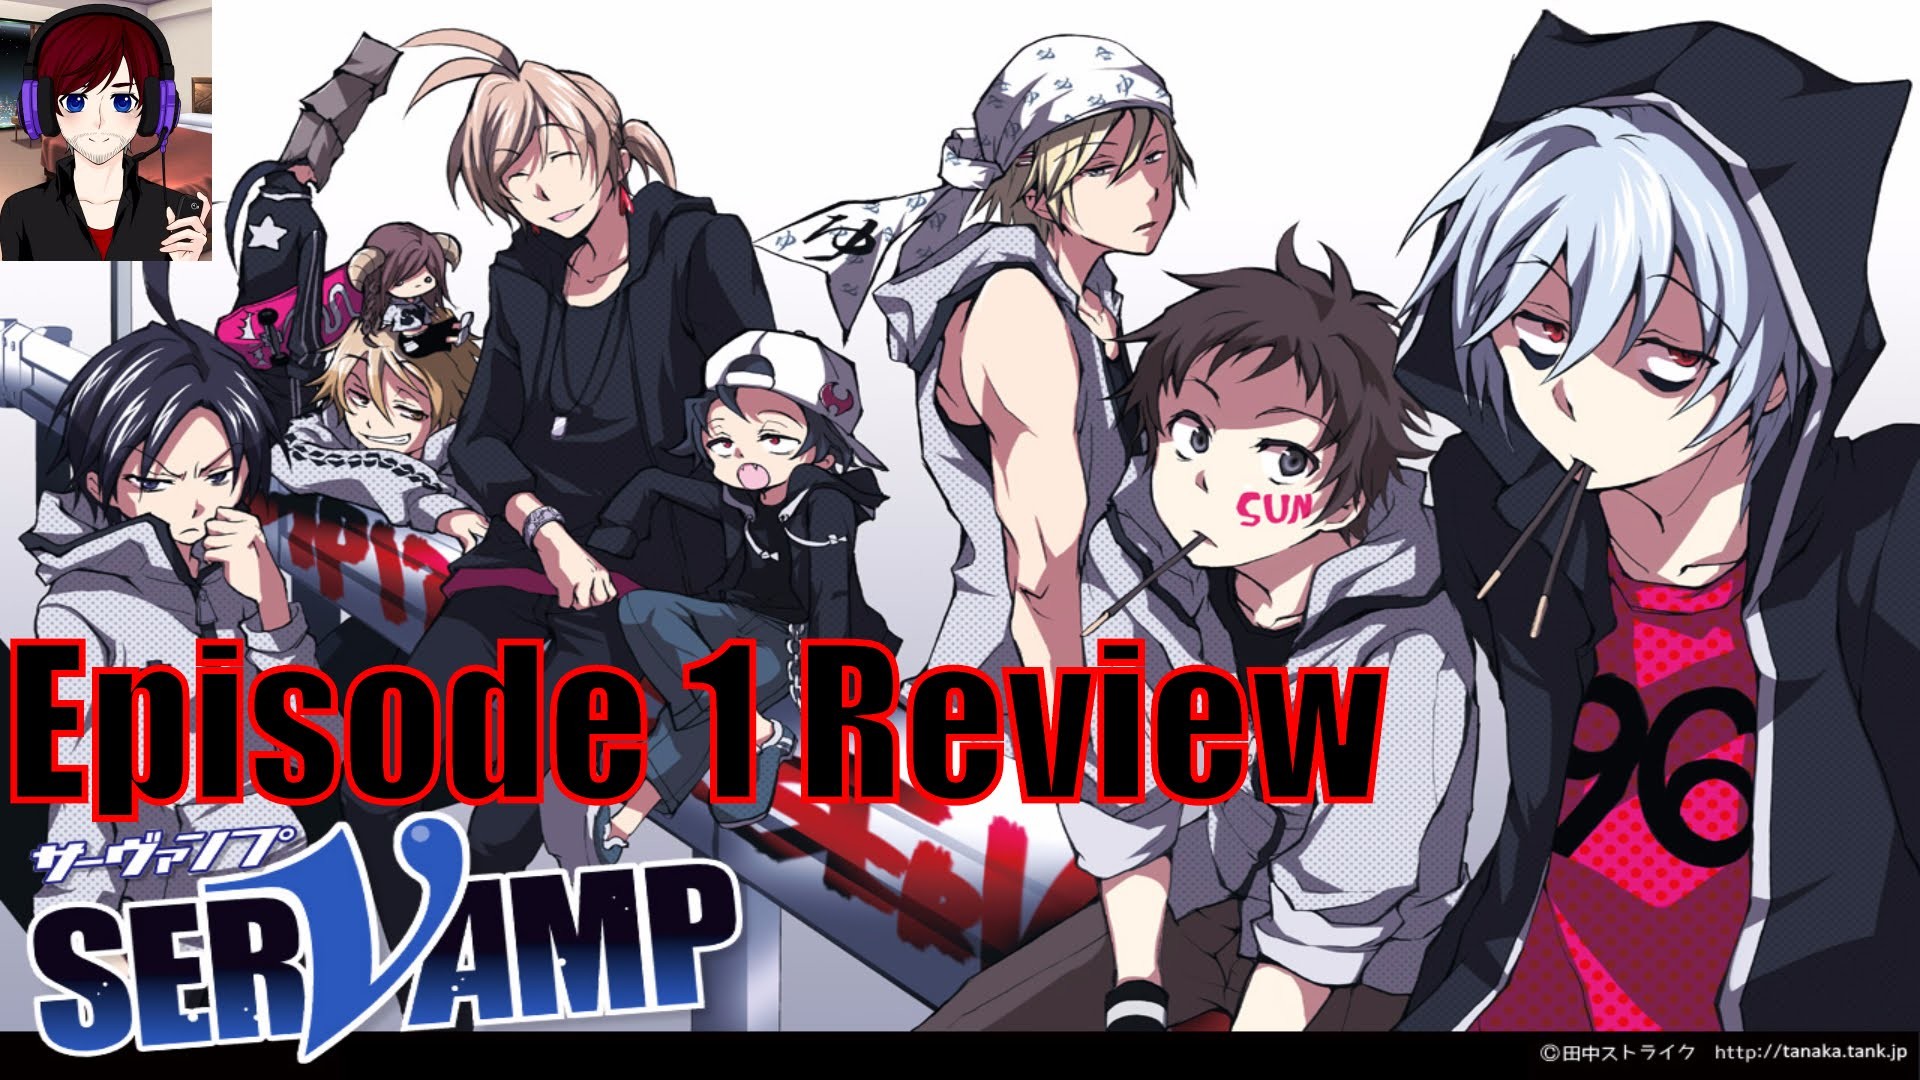 1920x1080 BRACE YOURSELVES, THE YAOI FAN ART IS COMING - Servamp Episode 1 Review